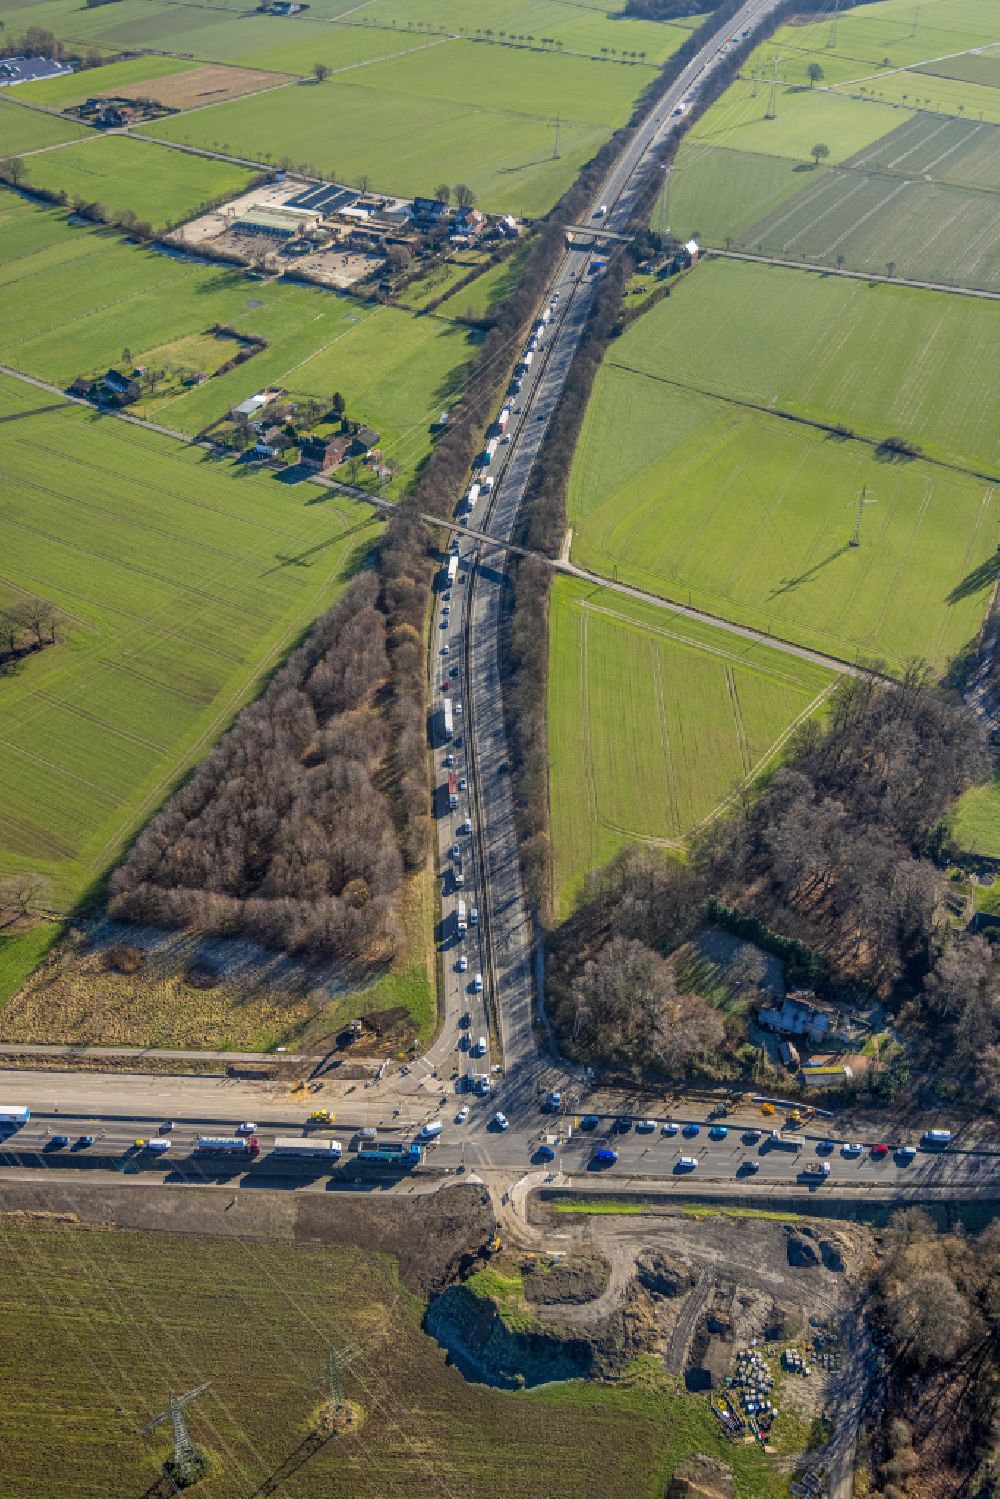 Eving from the bird's eye view: Construction site to remodel the course of the intersection on Bundesstrassen 236 and 54 in Eving at Ruhrgebiet in the state North Rhine-Westphalia, Germany